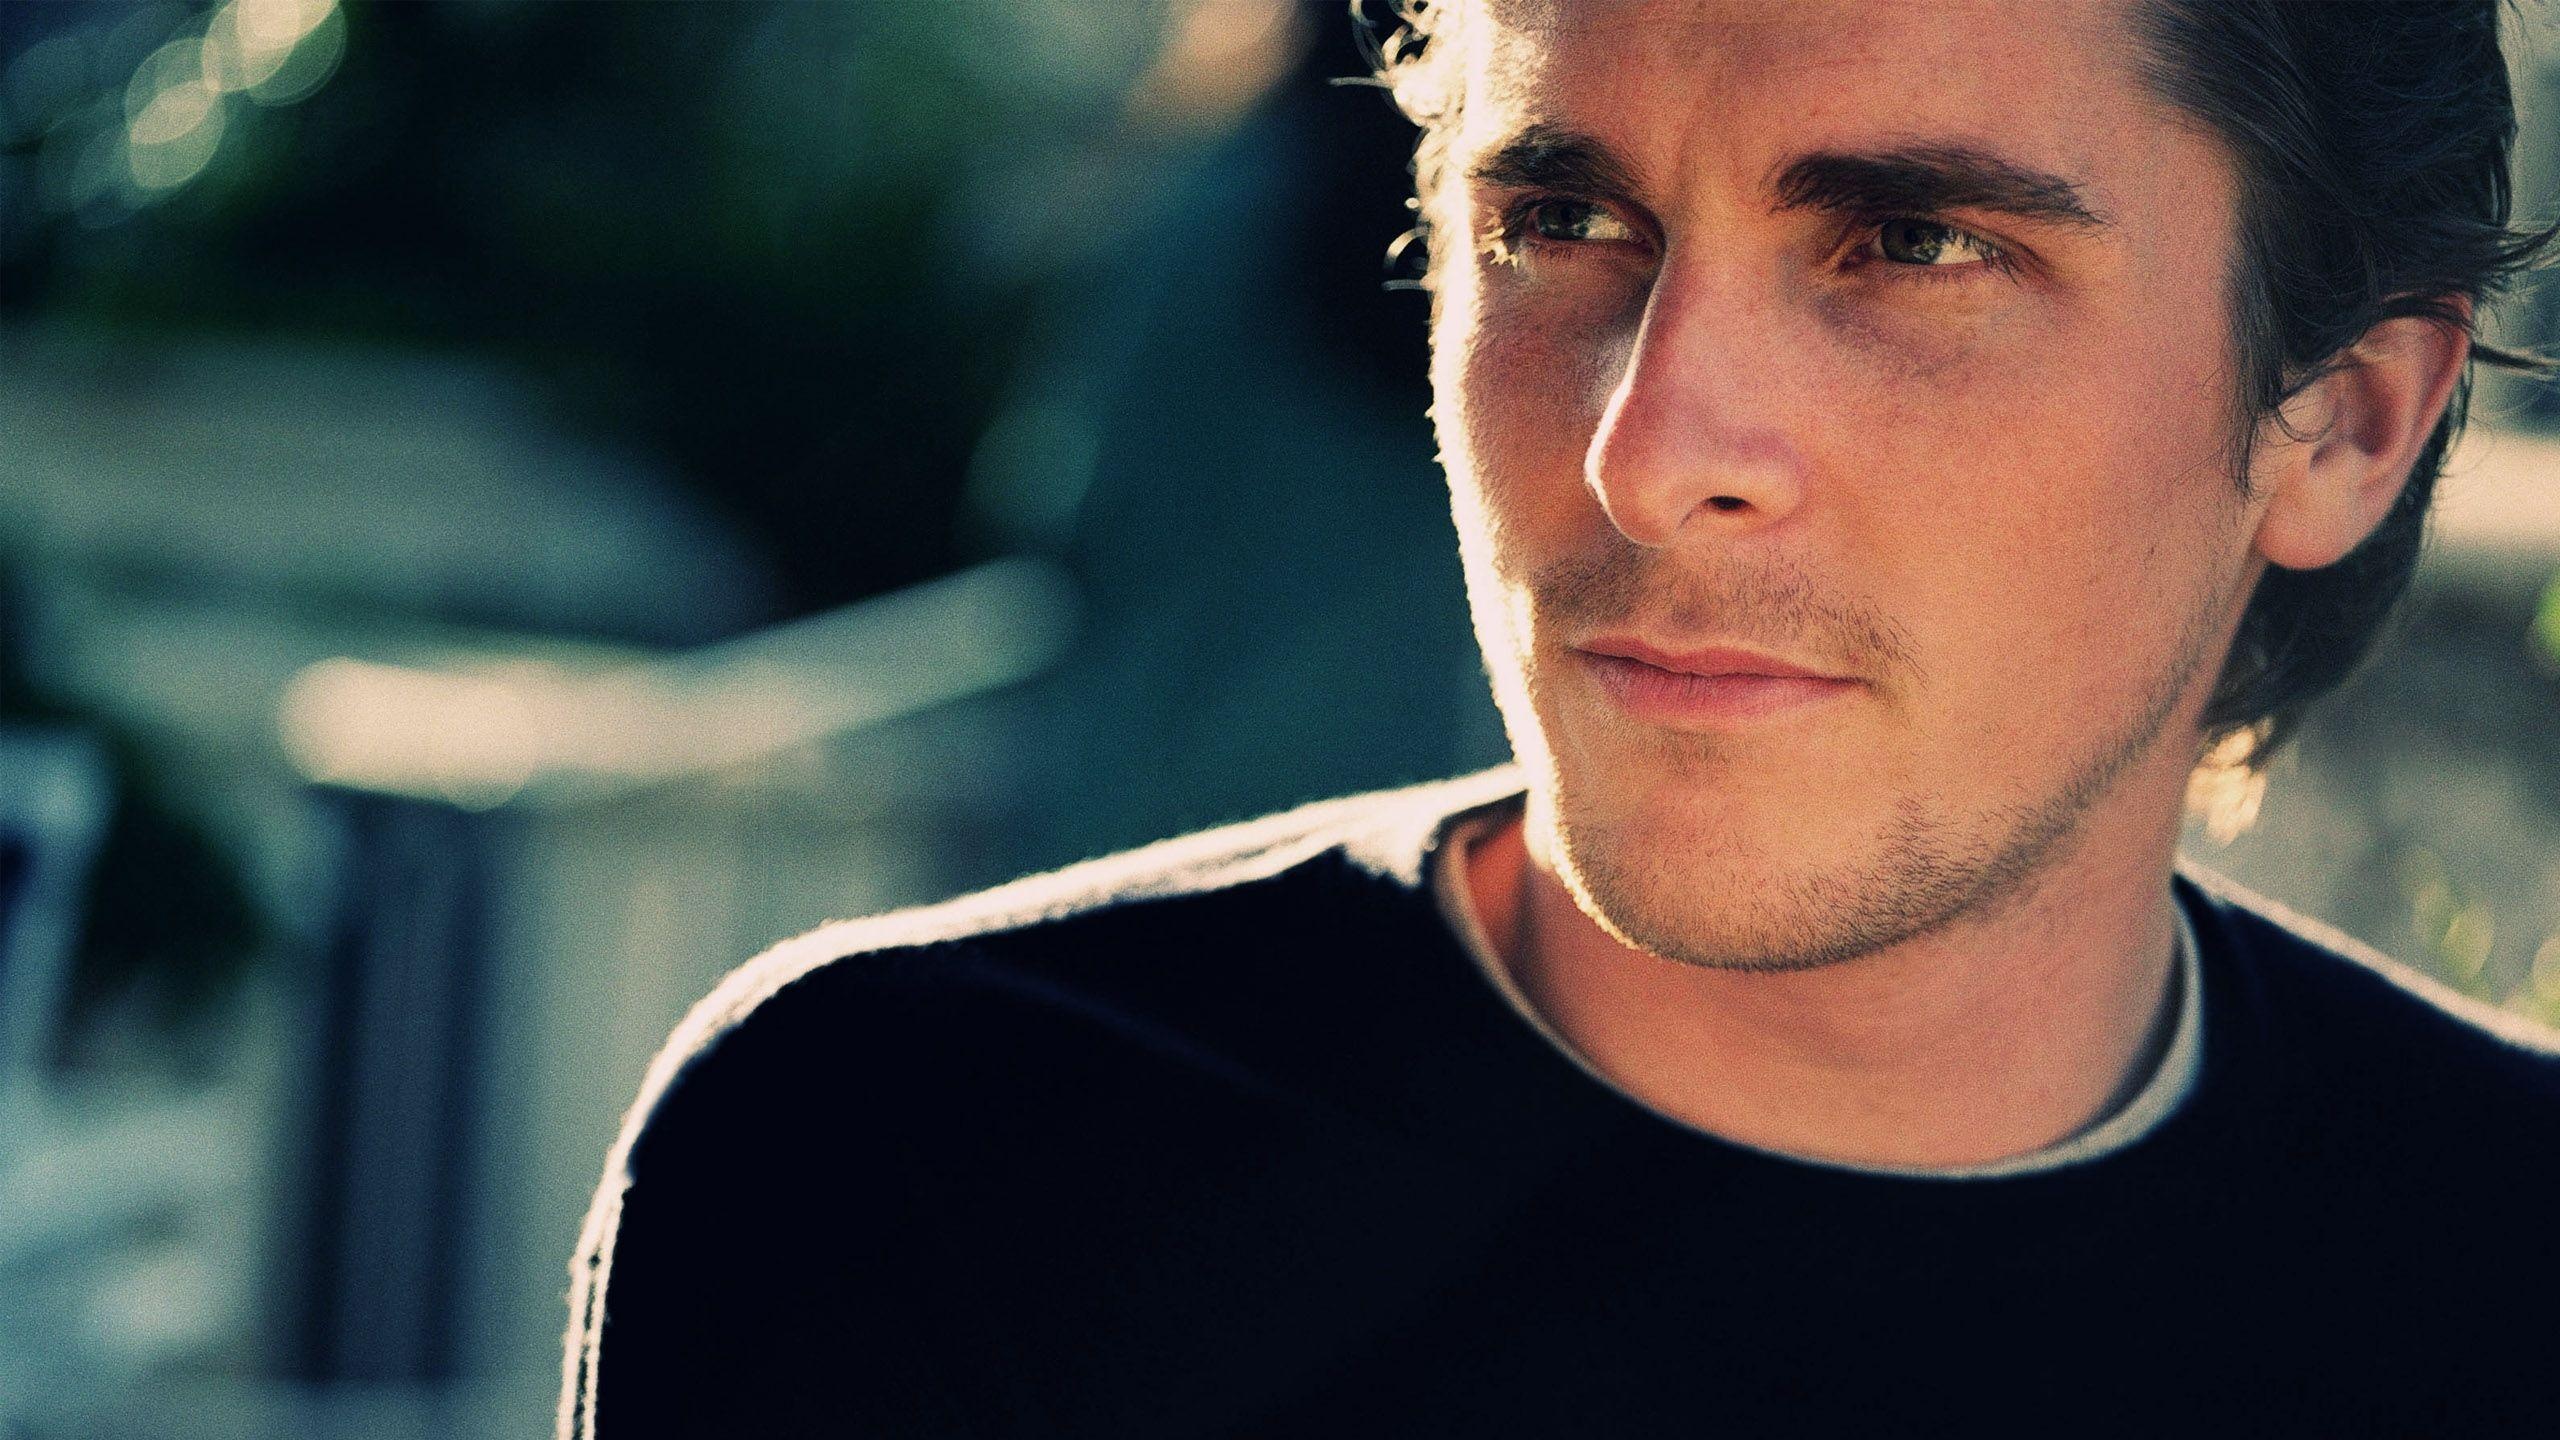 Christian Bale: One of the bold actors in Hollywood. 2560x1440 HD Wallpaper.